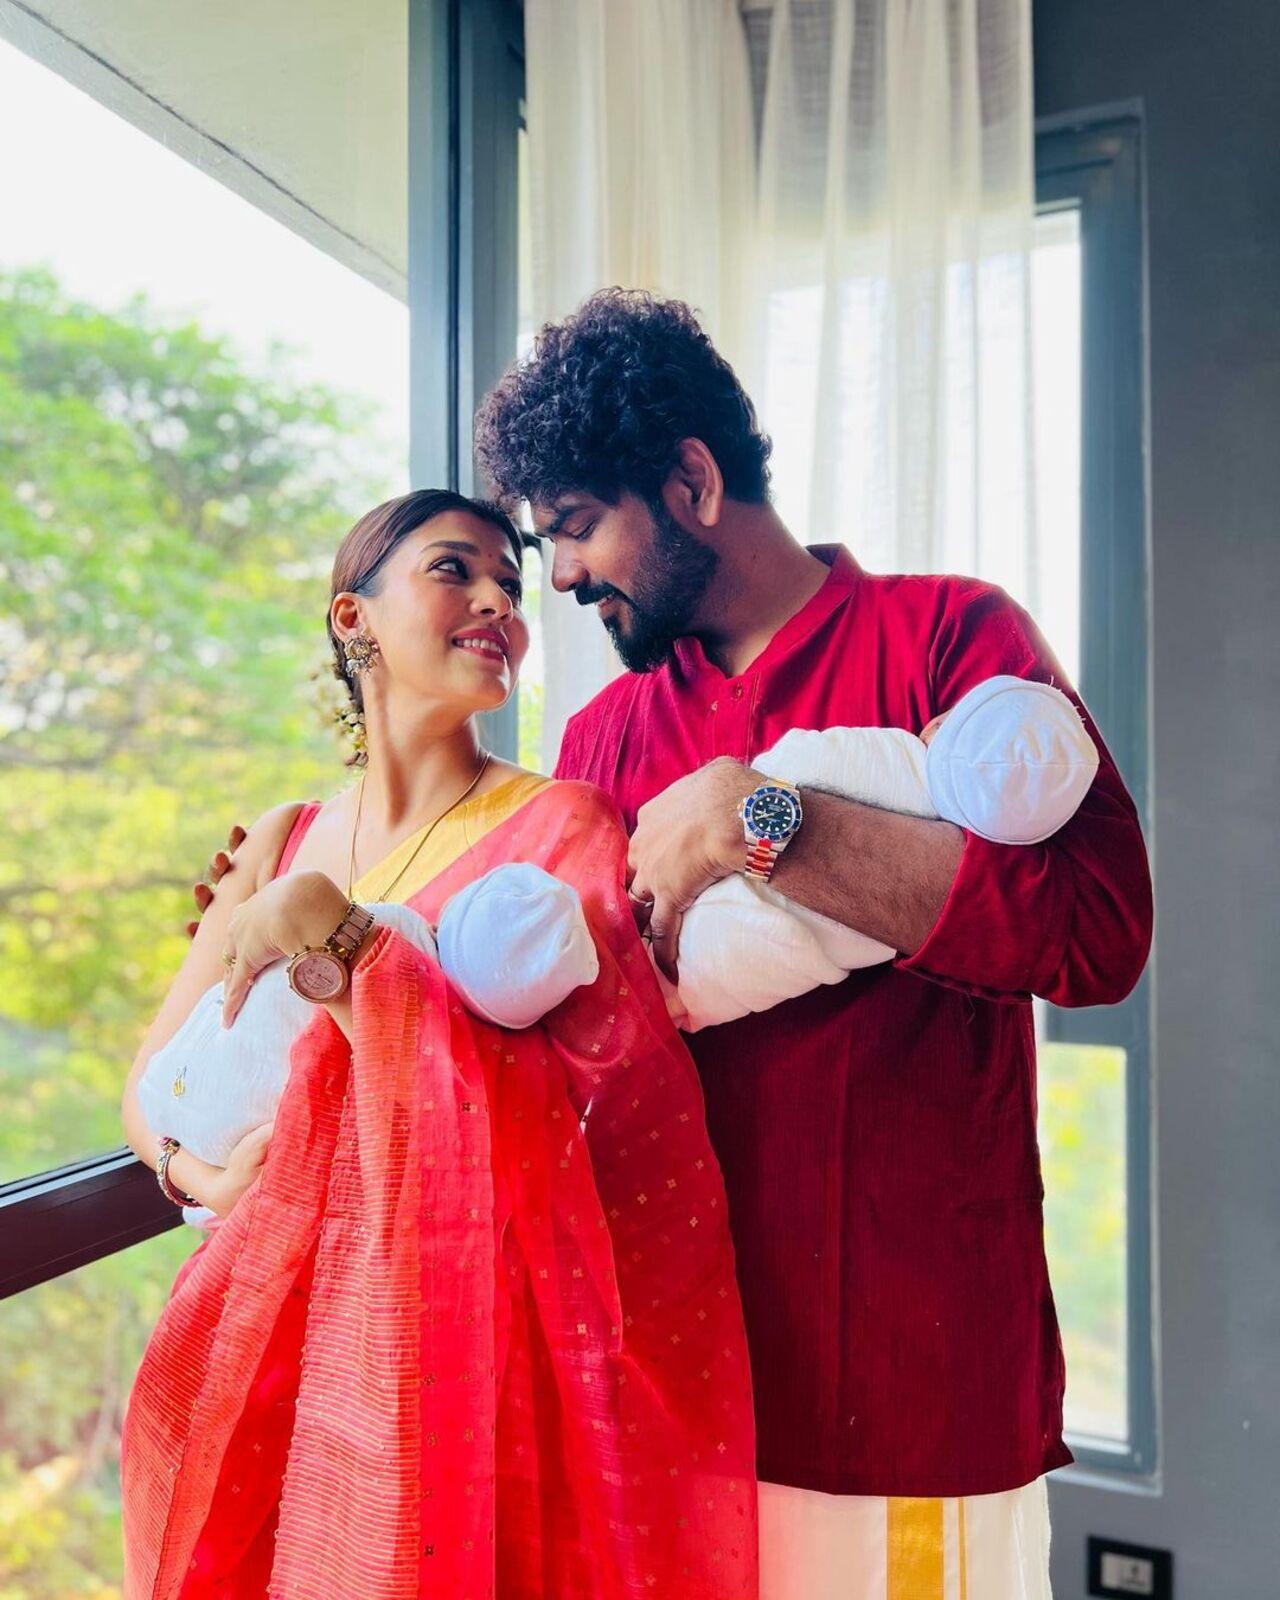 On October 9, 2022, Nayanthara and Vignesh embraced parenthood with the arrival of their twins, Uyir and Ulagam. Reportedly, they were conceived via surrogacy